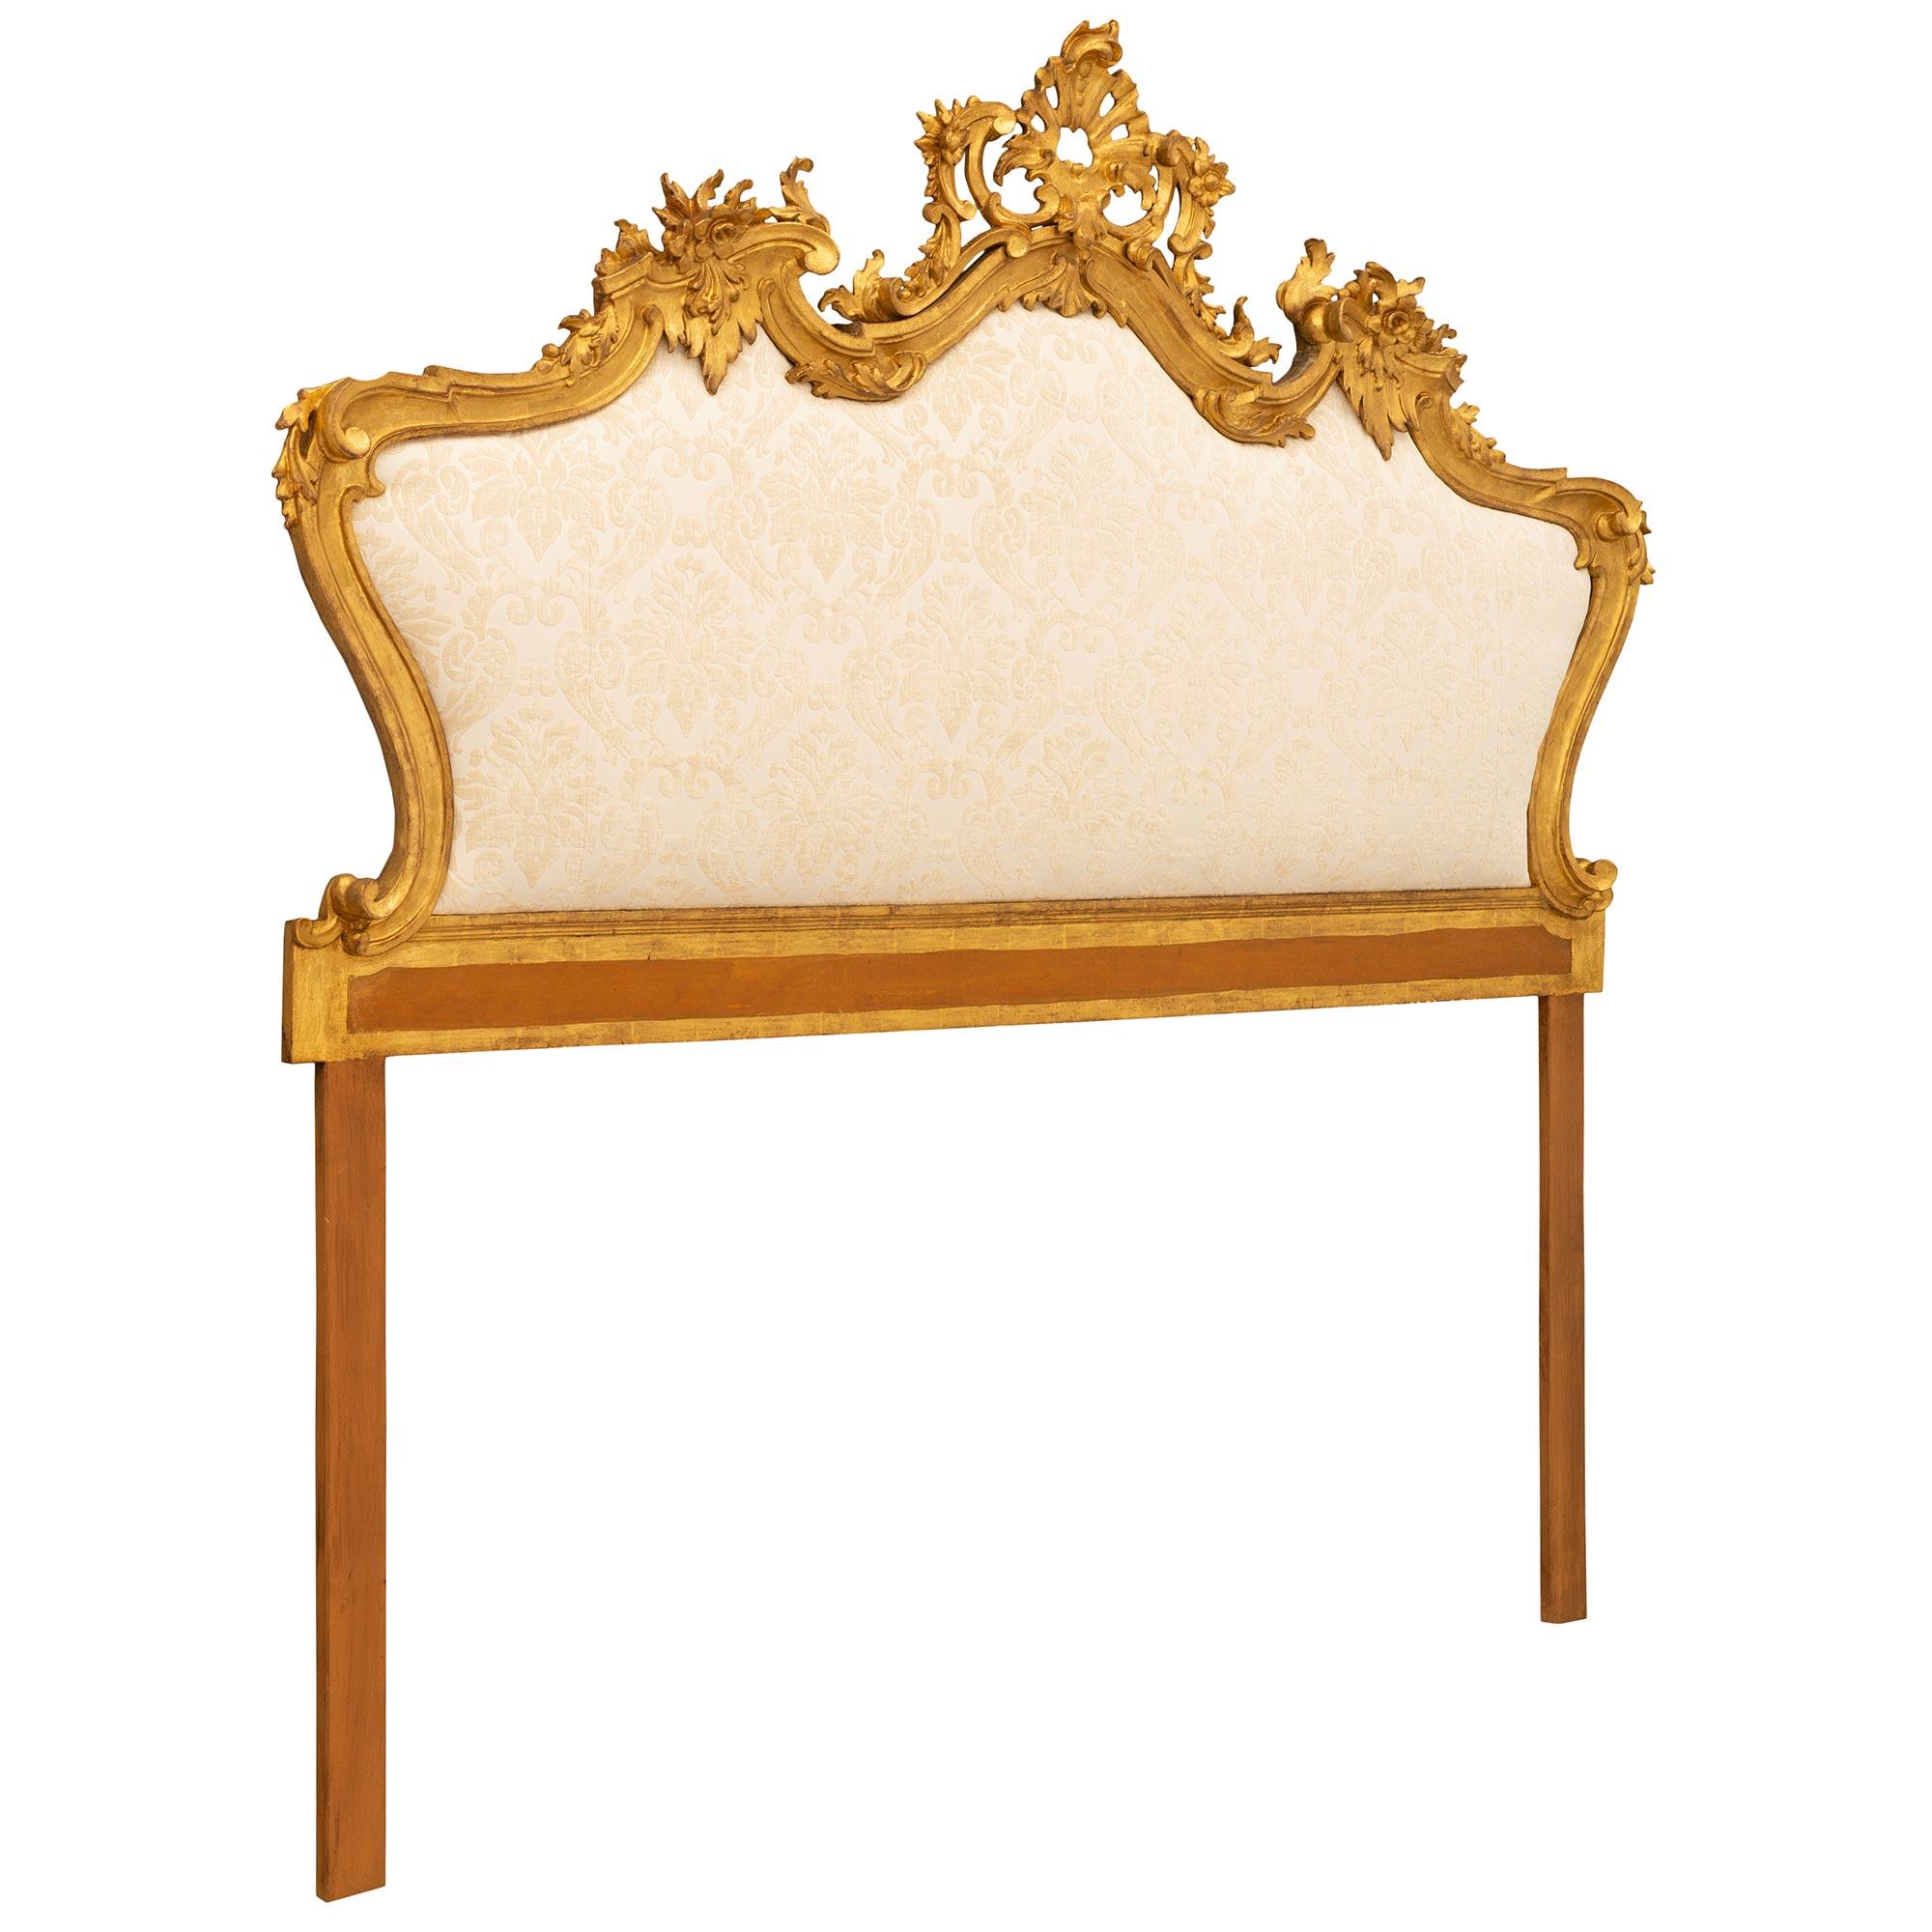 A beautiful and extremely decorative Italian 19th century Venetian st. giltwood and polychrome headboard. The upholstered headboard is framed within a wrap around mottled border and a lovely polychrome band at the base. The striking top crown